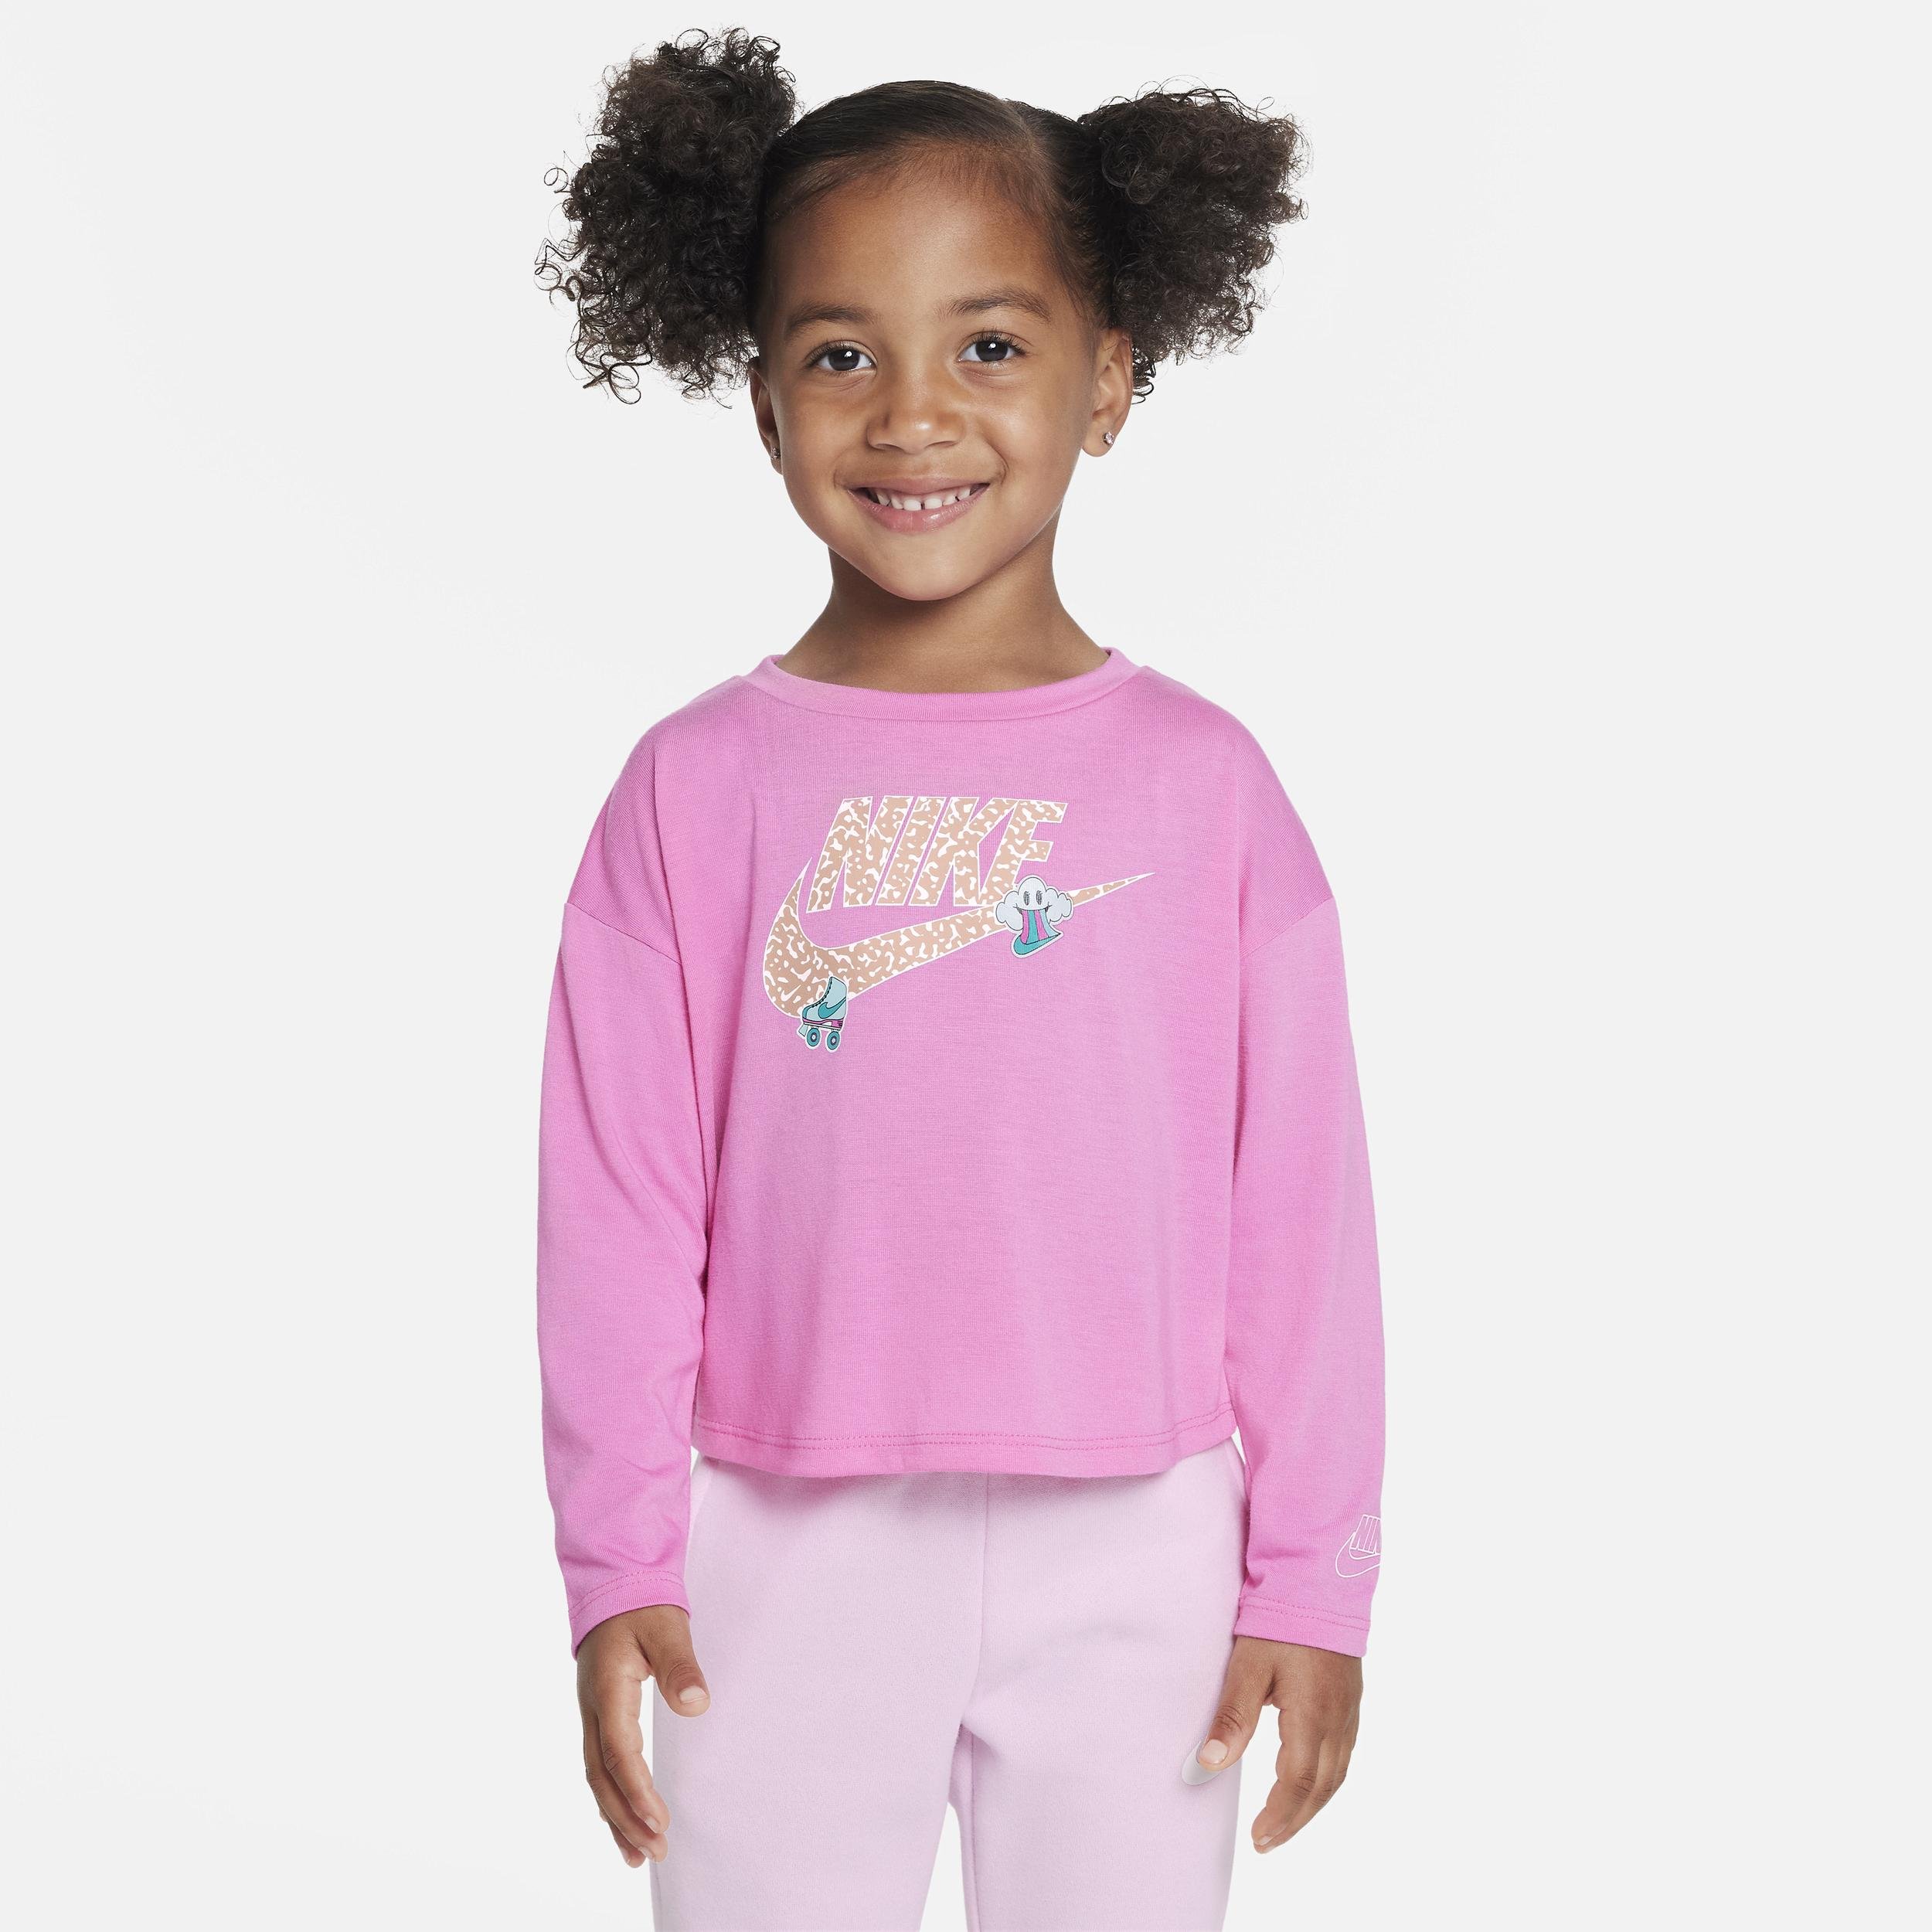 Nike Notebook Print Long Sleeve Knit Top Toddler Top by NIKE